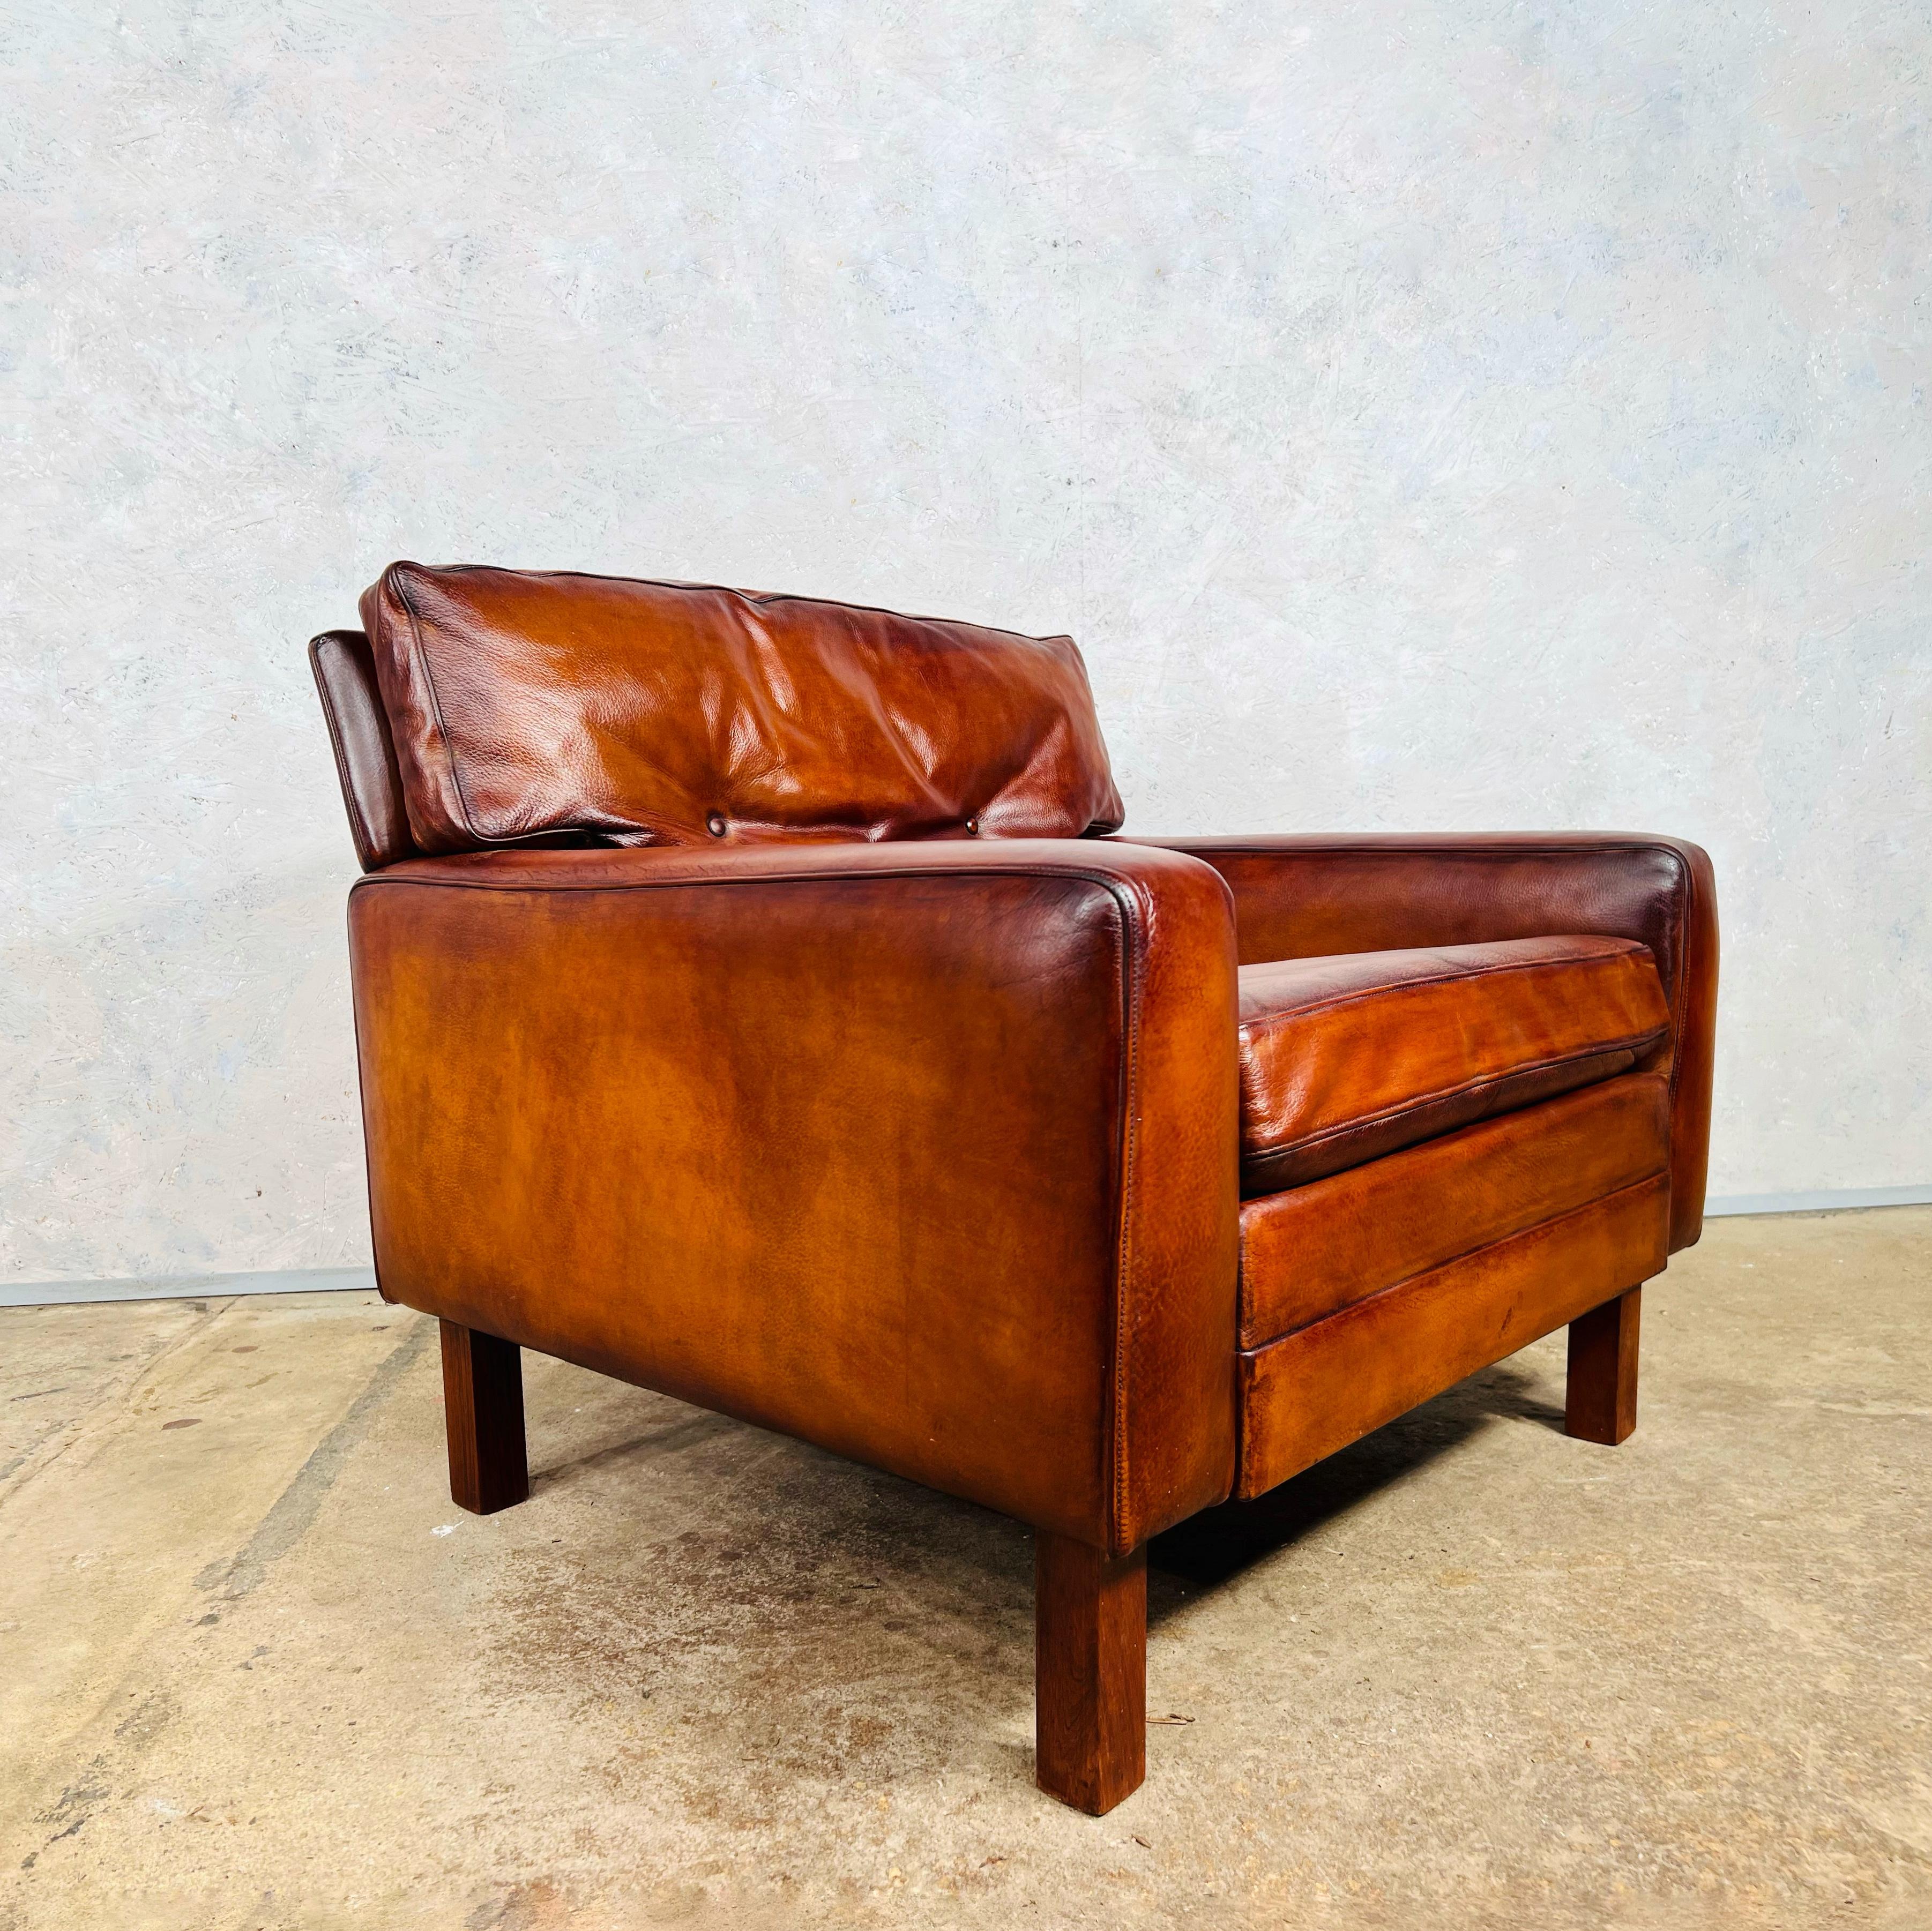 Great quality Vintage Danish 1970s Thams Kvalitet leather armchair with great quality thick leather.
Great proportions resting on solid rosewood feet with an exceptional hand dyed cognac leather with a great patina and finish.

Very comfortable